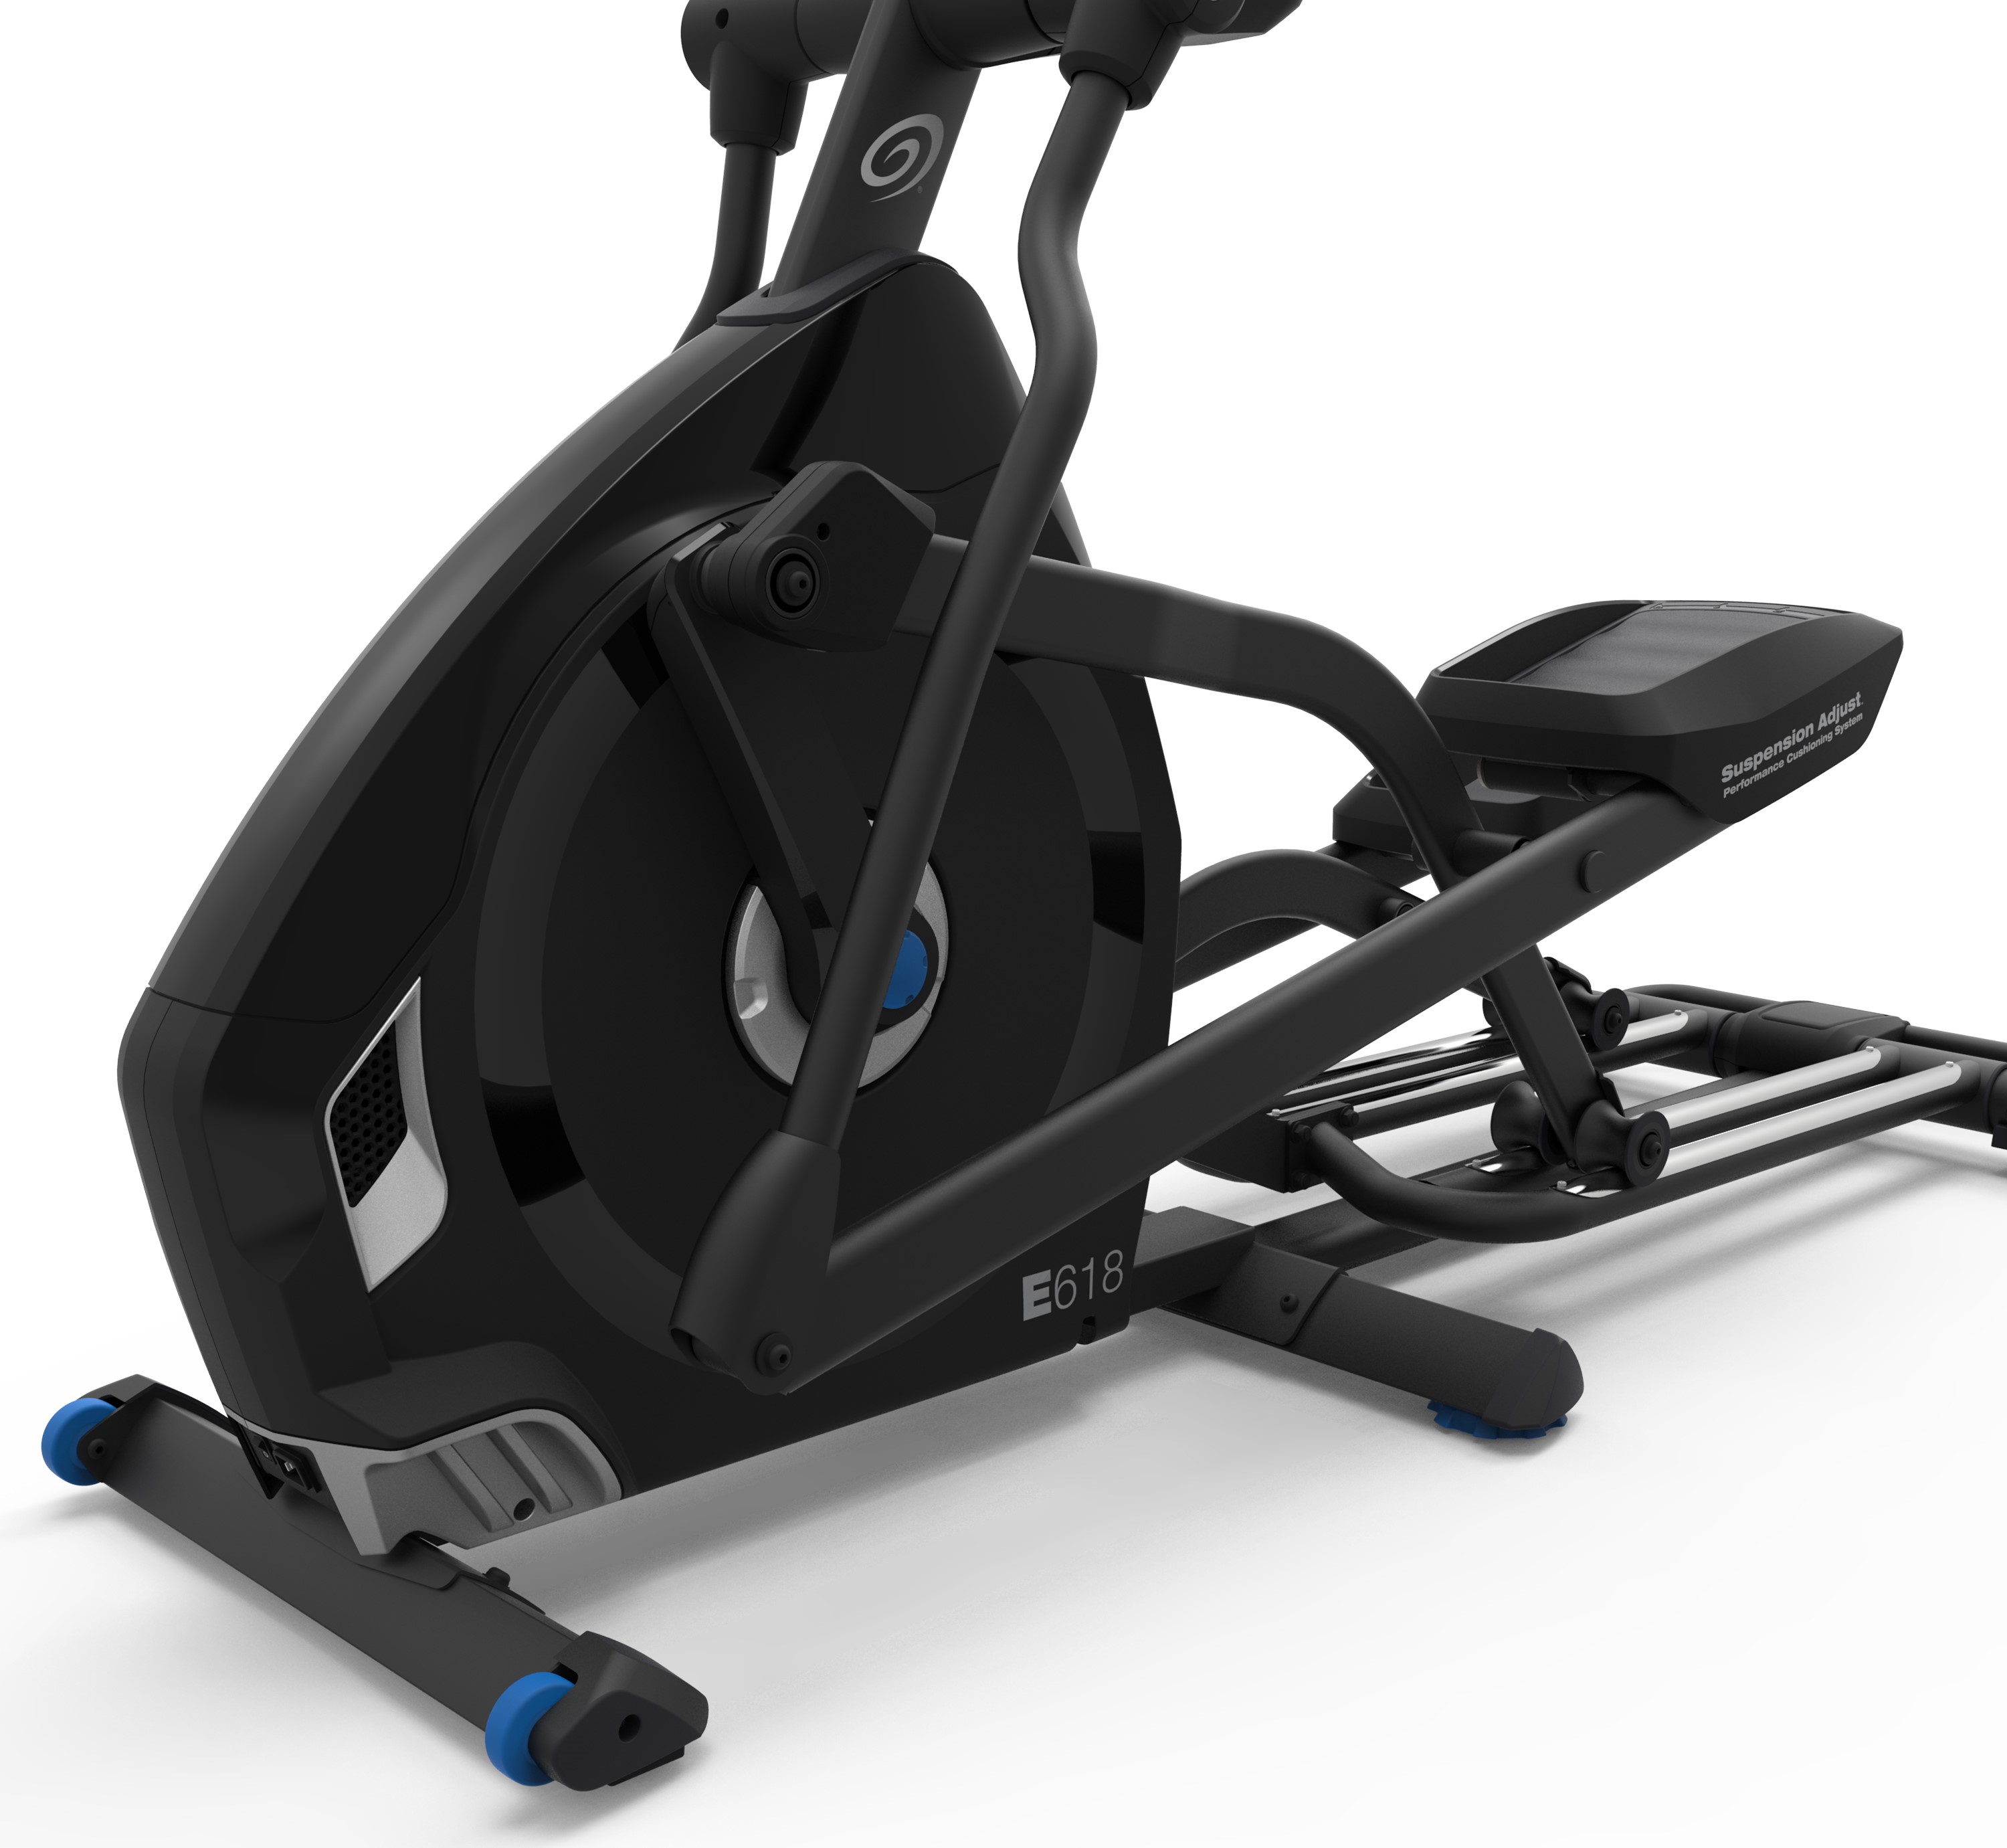 Nautilus E618 Performance Series Home and Gym Workout Cardio Elliptical Trainer - image 9 of 11